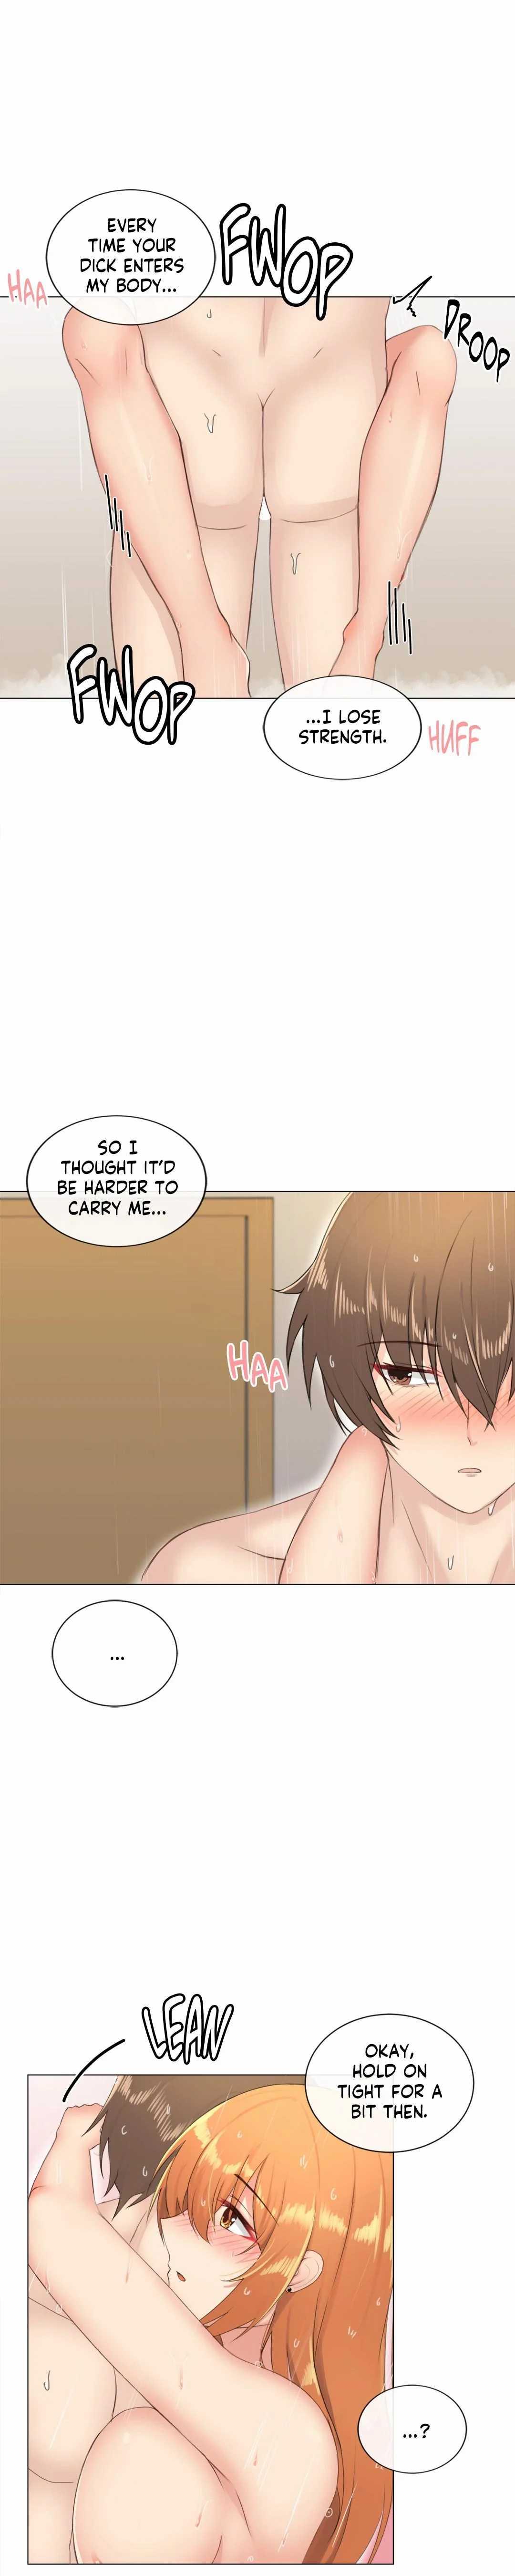 [Dumangoon, 130F] Sexcape Room: Pile Up Ch.9/9 [English] [Manhwa PDF] Completed 91